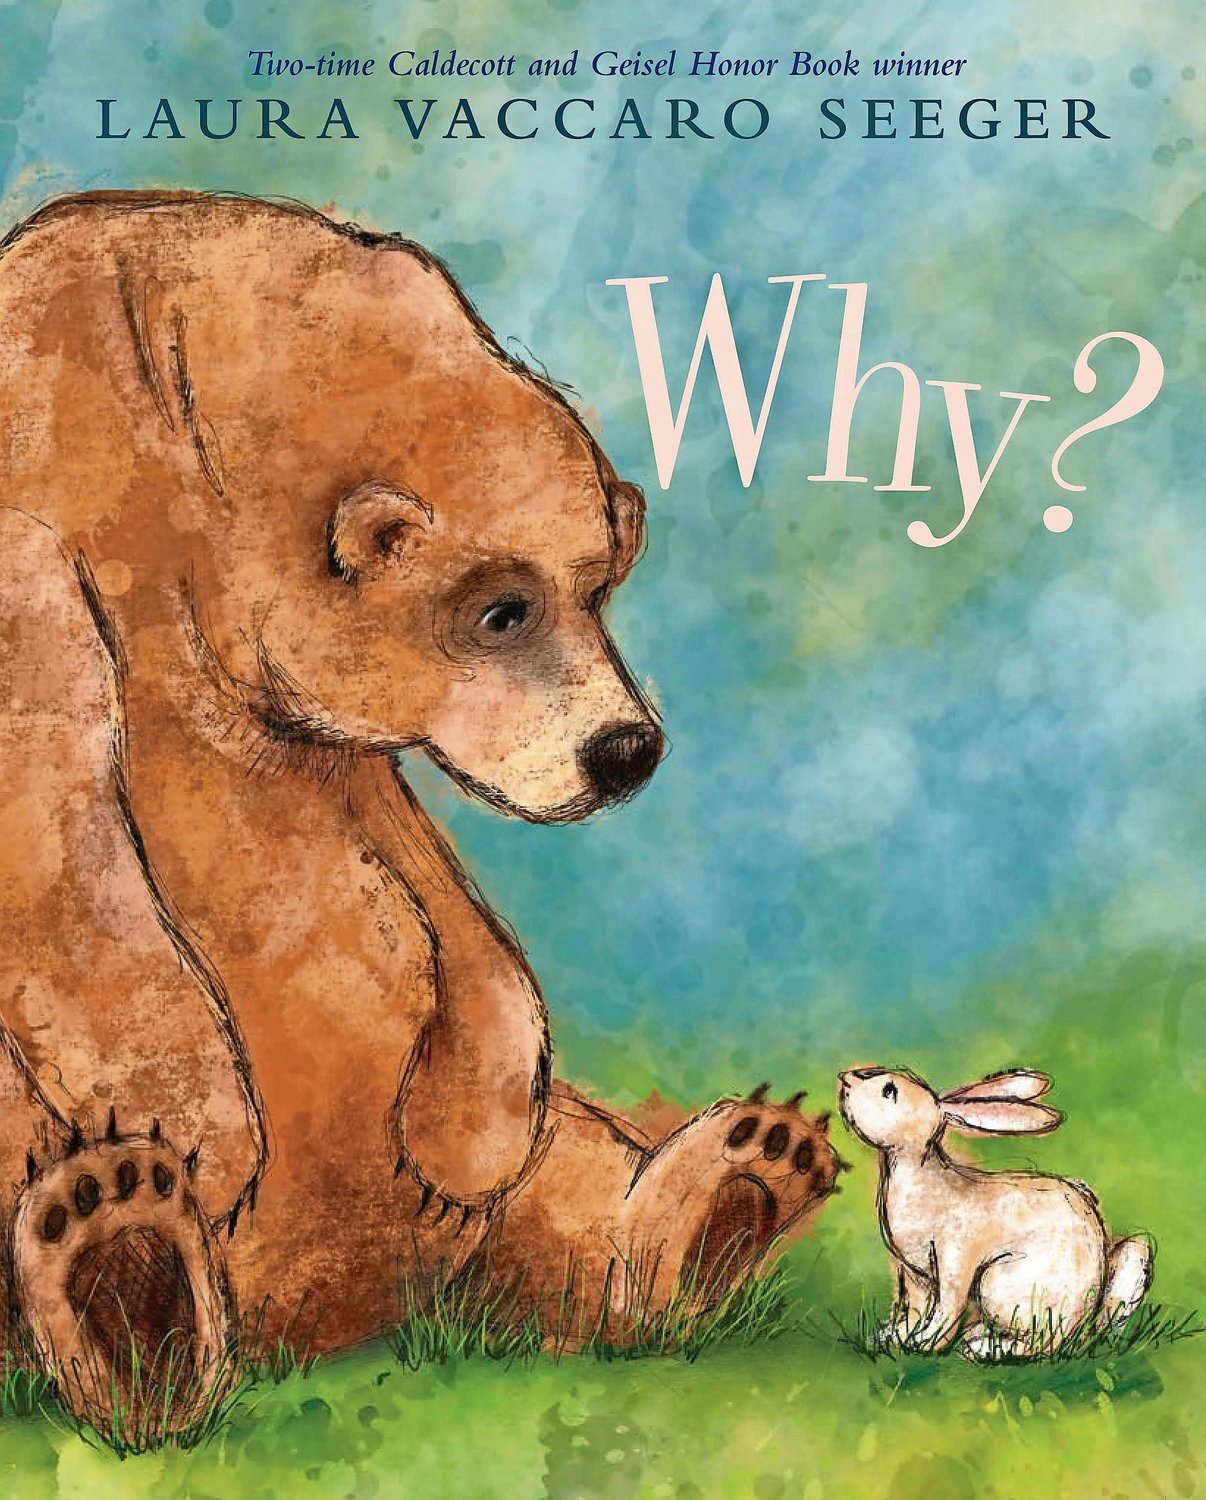 Seeger wrote and illustrated “Why?” because “it’s a question I’m always asking, I’m always wondering why things are the way they are,” she said. “Why?” is her 19th book and counting.